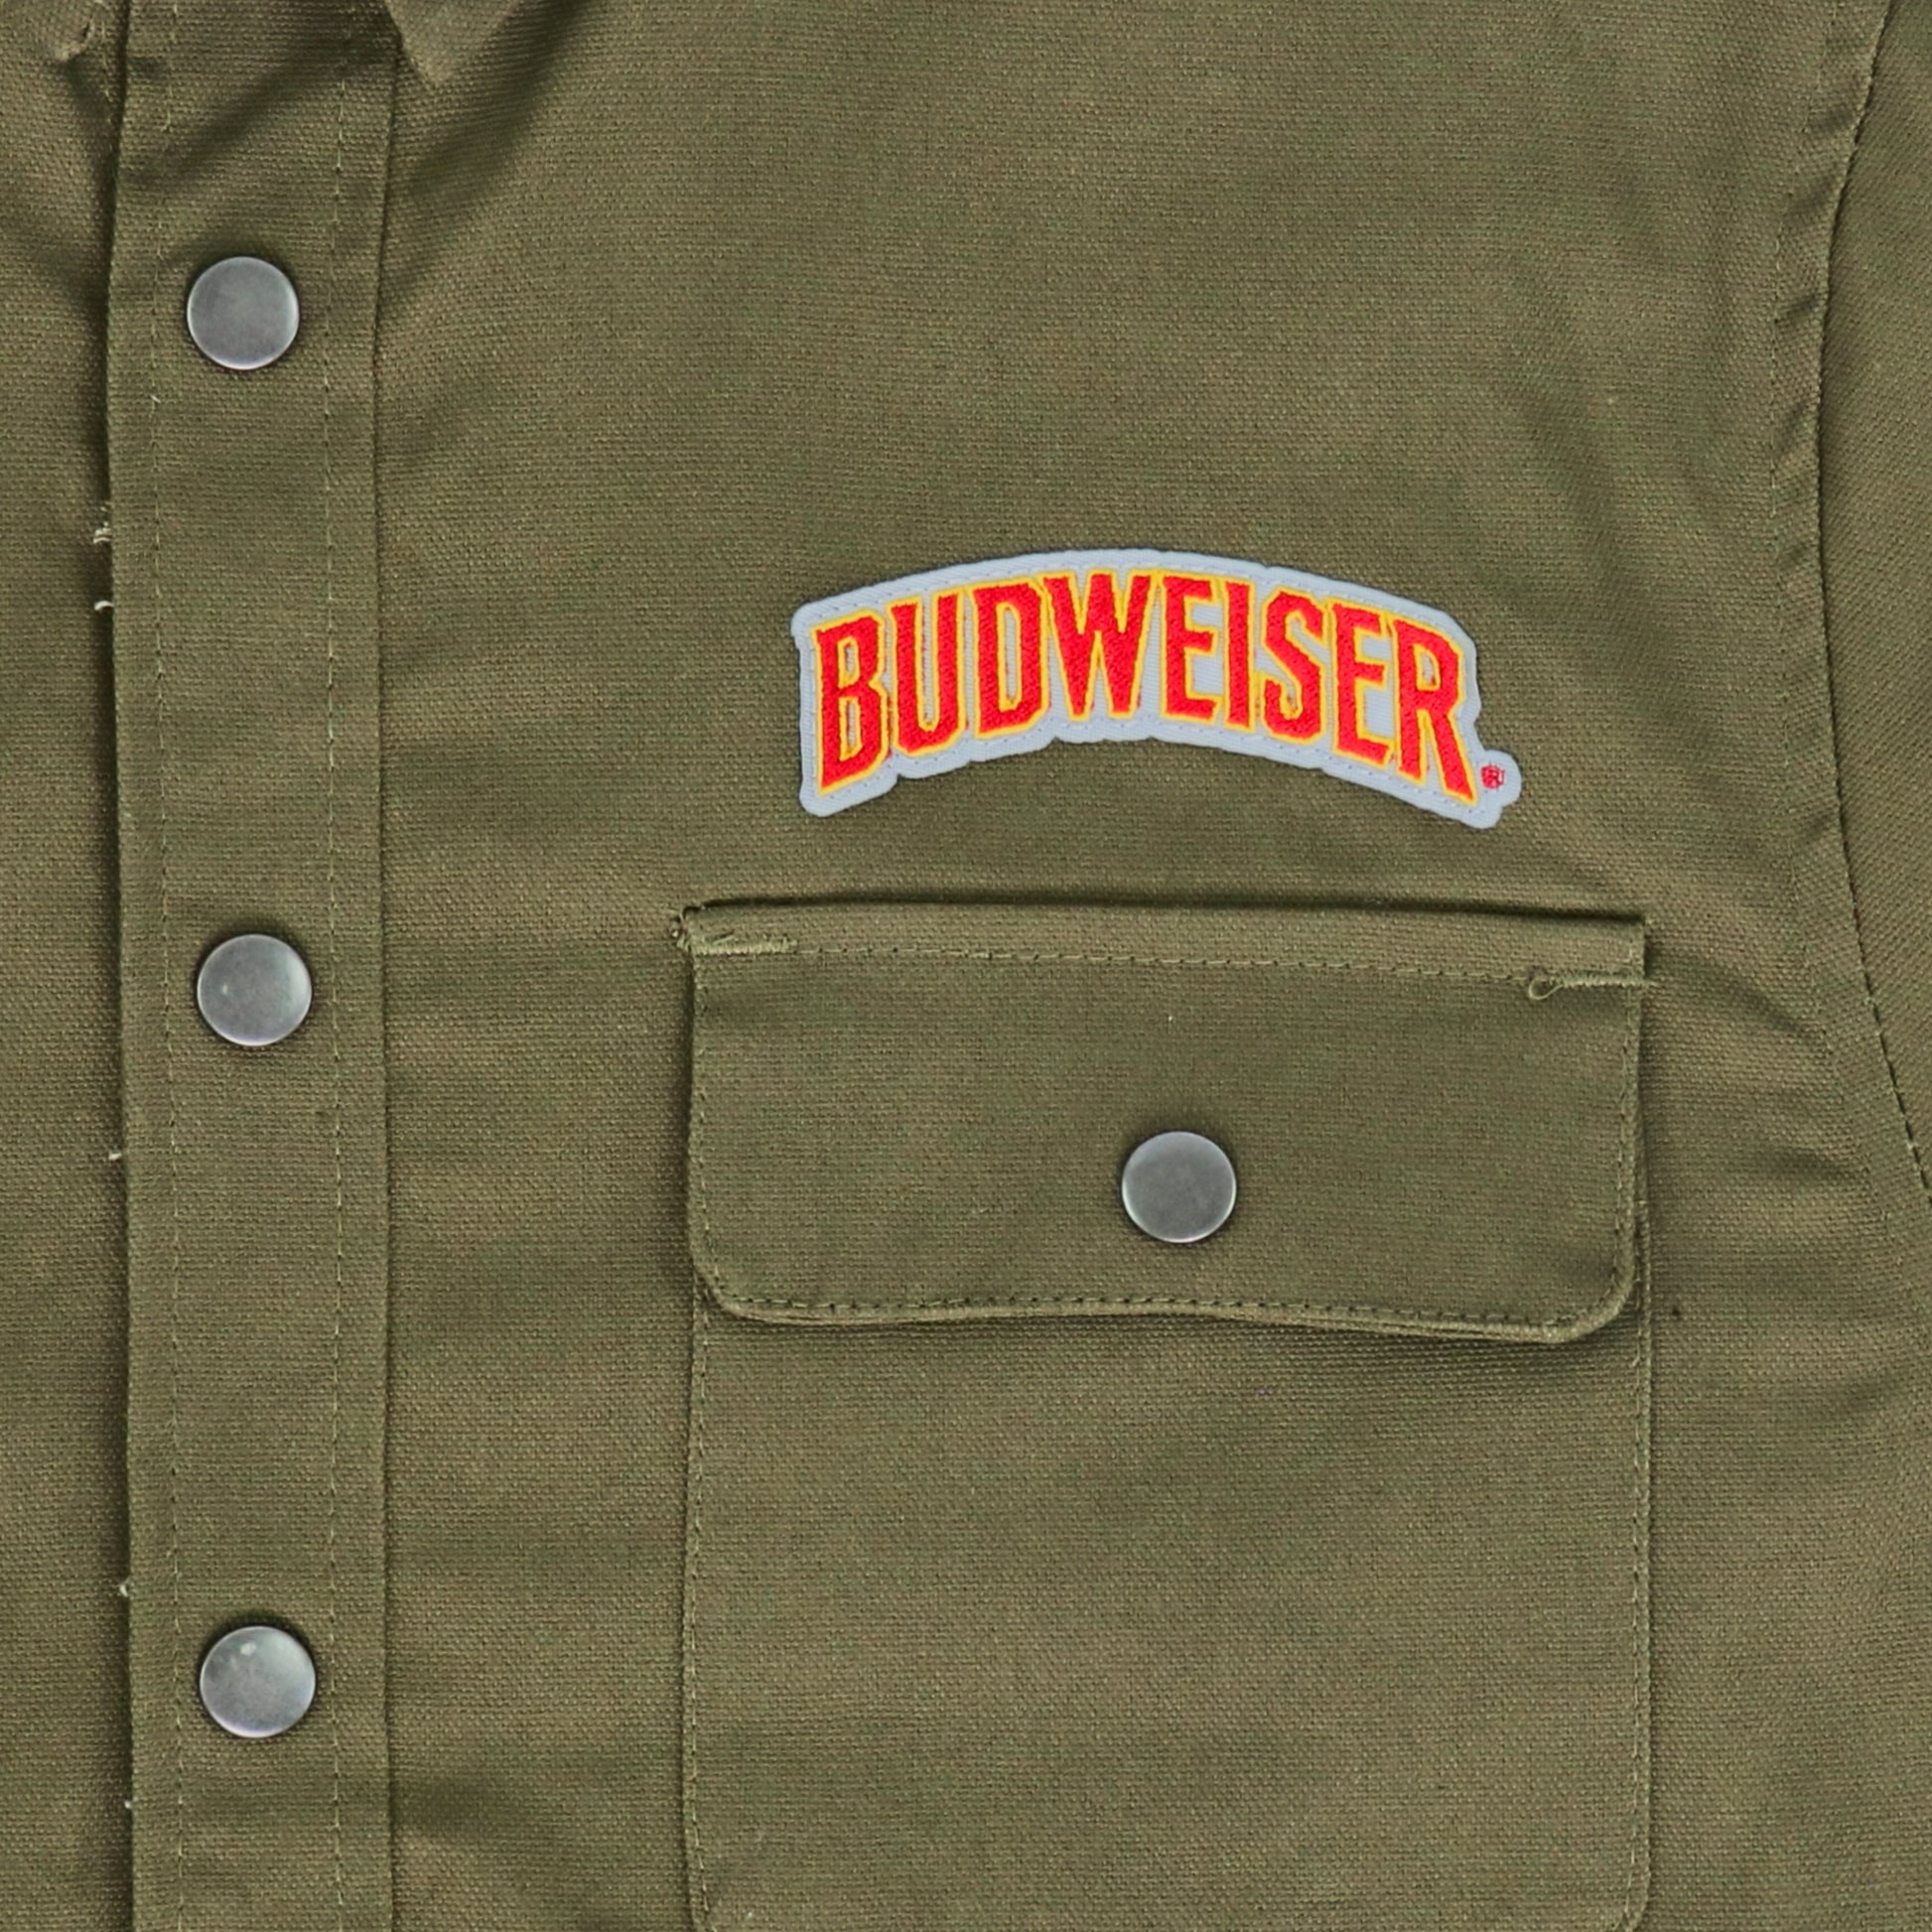 Close up of embroidered Budweiser logo on front of jacket above pocket